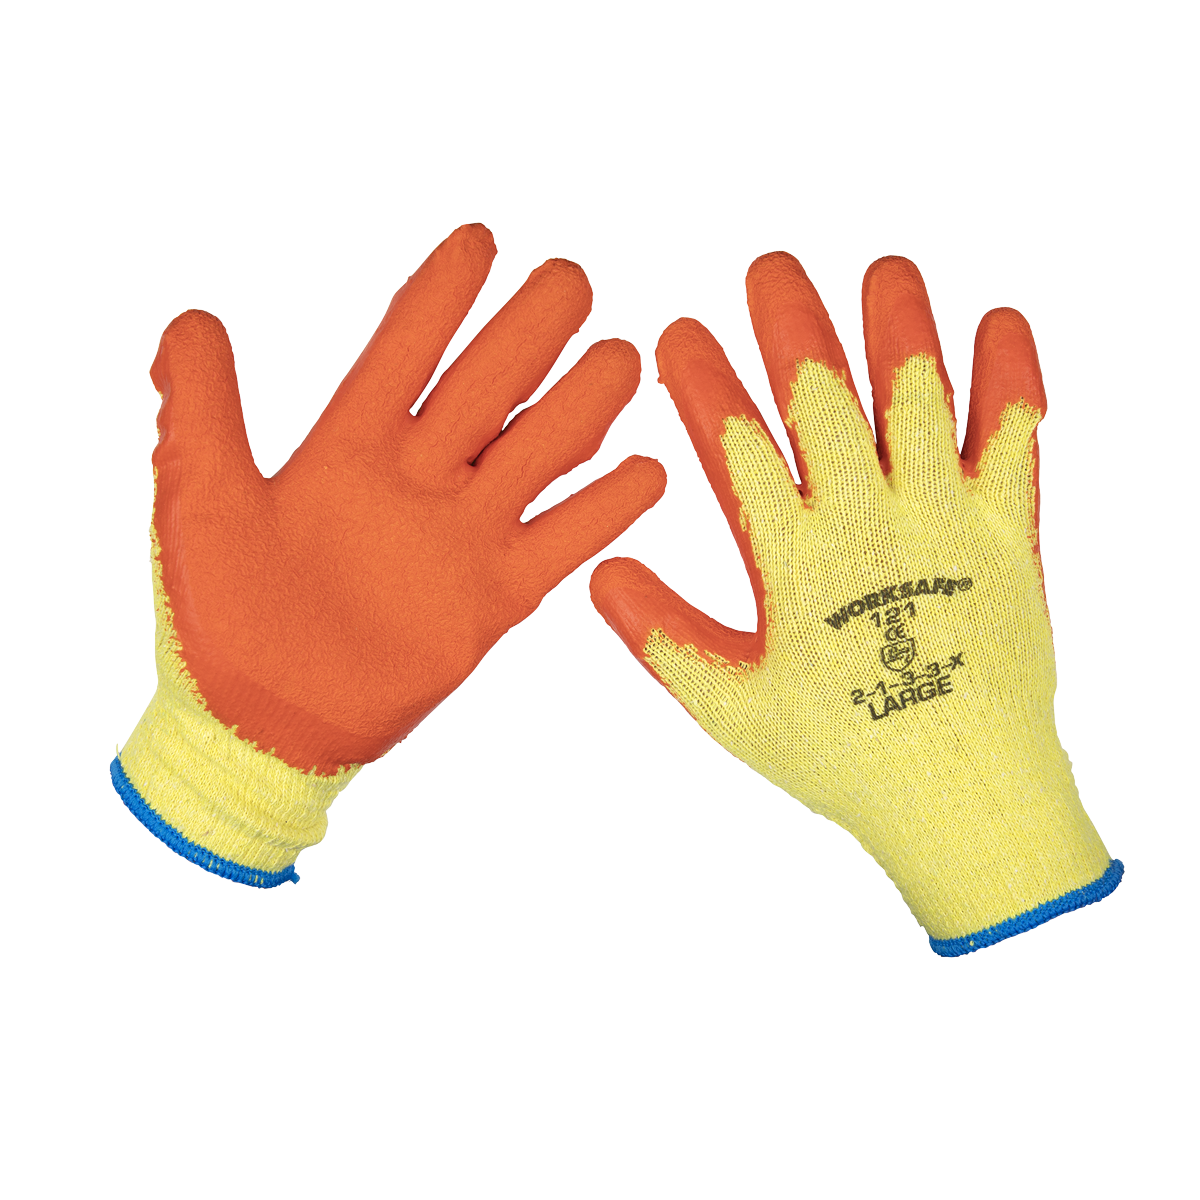 Super Grip Knitted Gloves Latex Palm (Large) - Pack of 120 Pairs - 9121L/B120 - Farming Parts